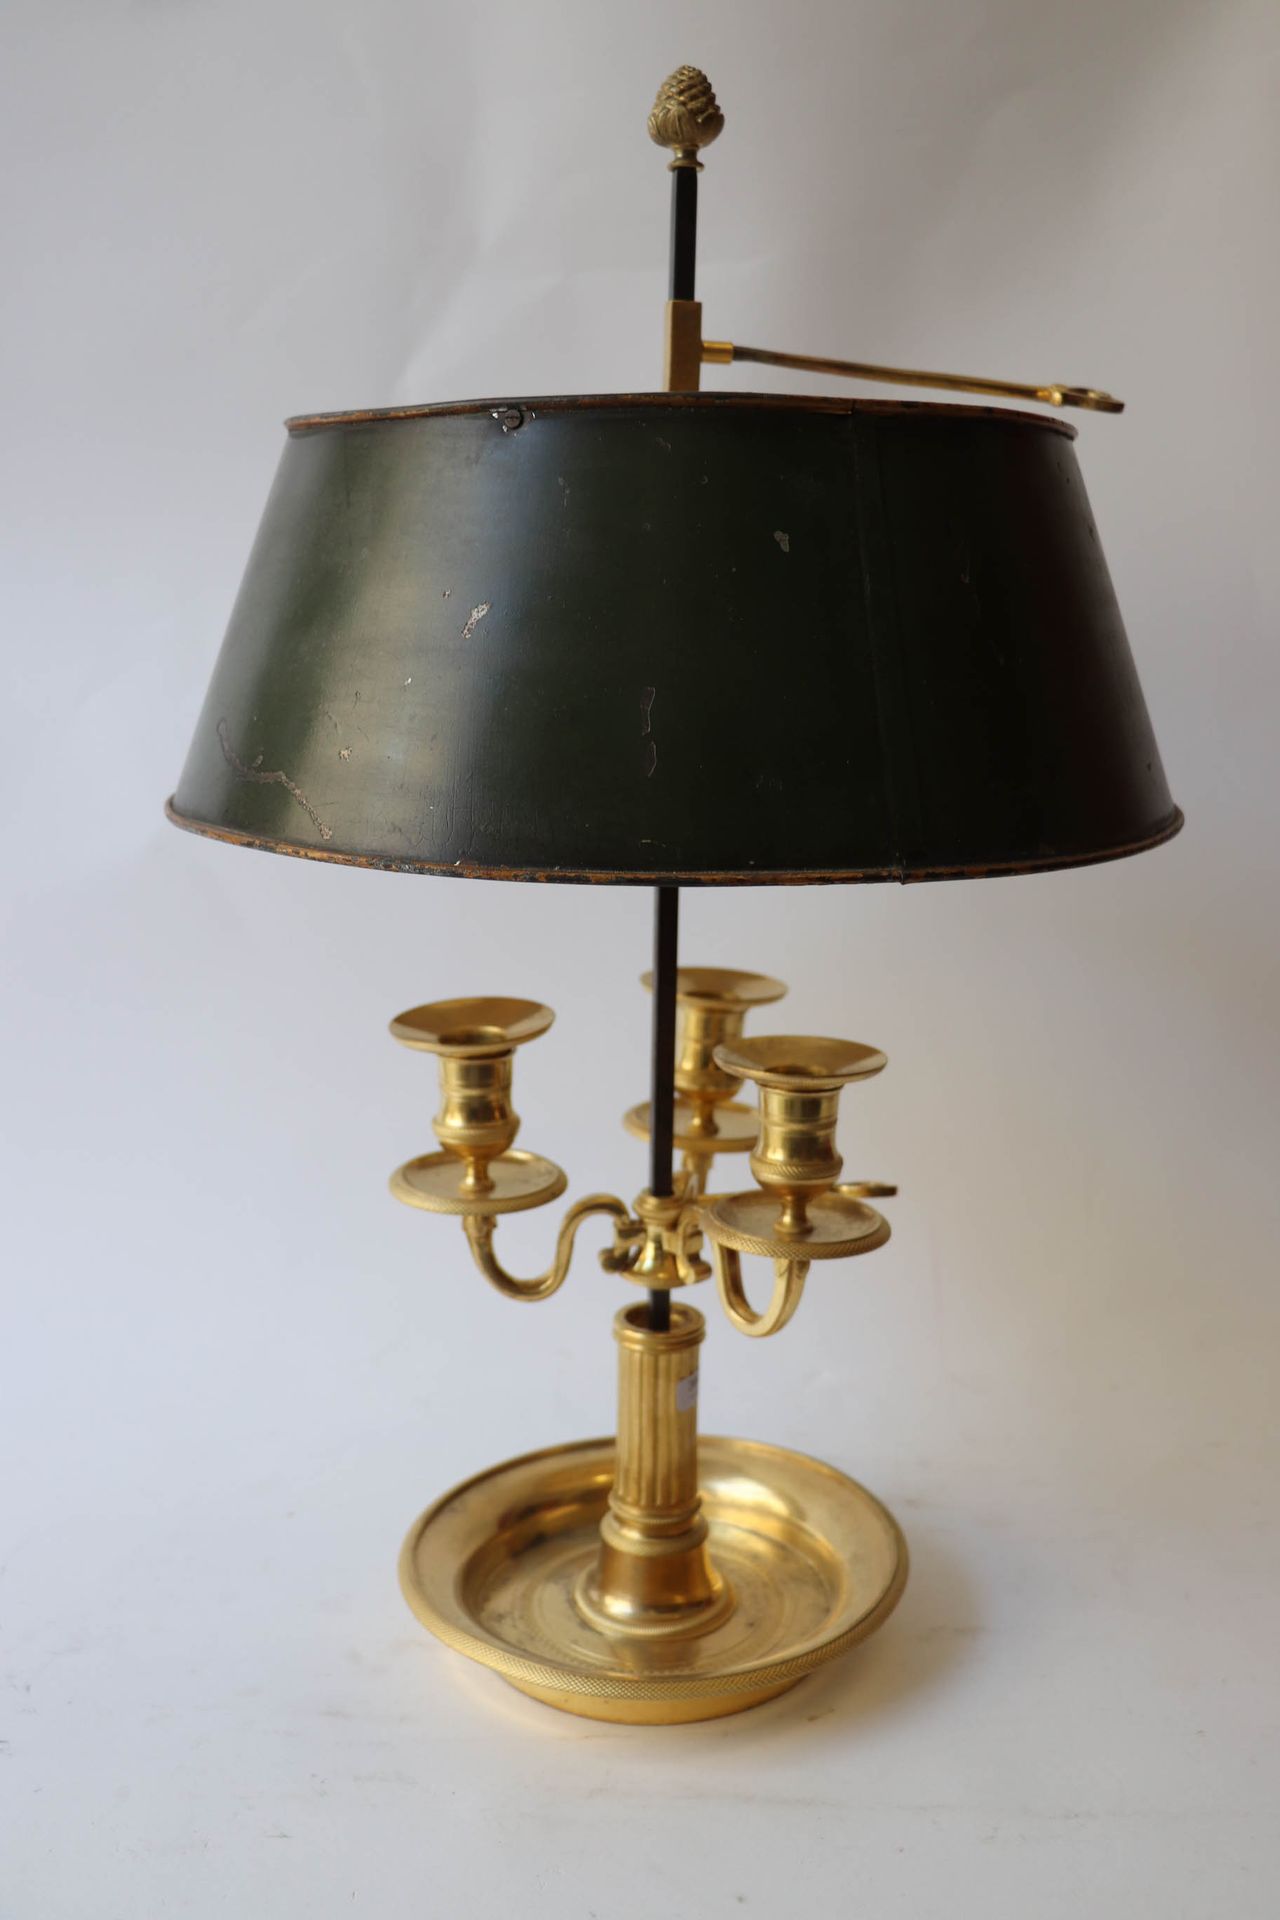 Null A gilt bronze hot water bottle lamp with three arms and a green painted she&hellip;